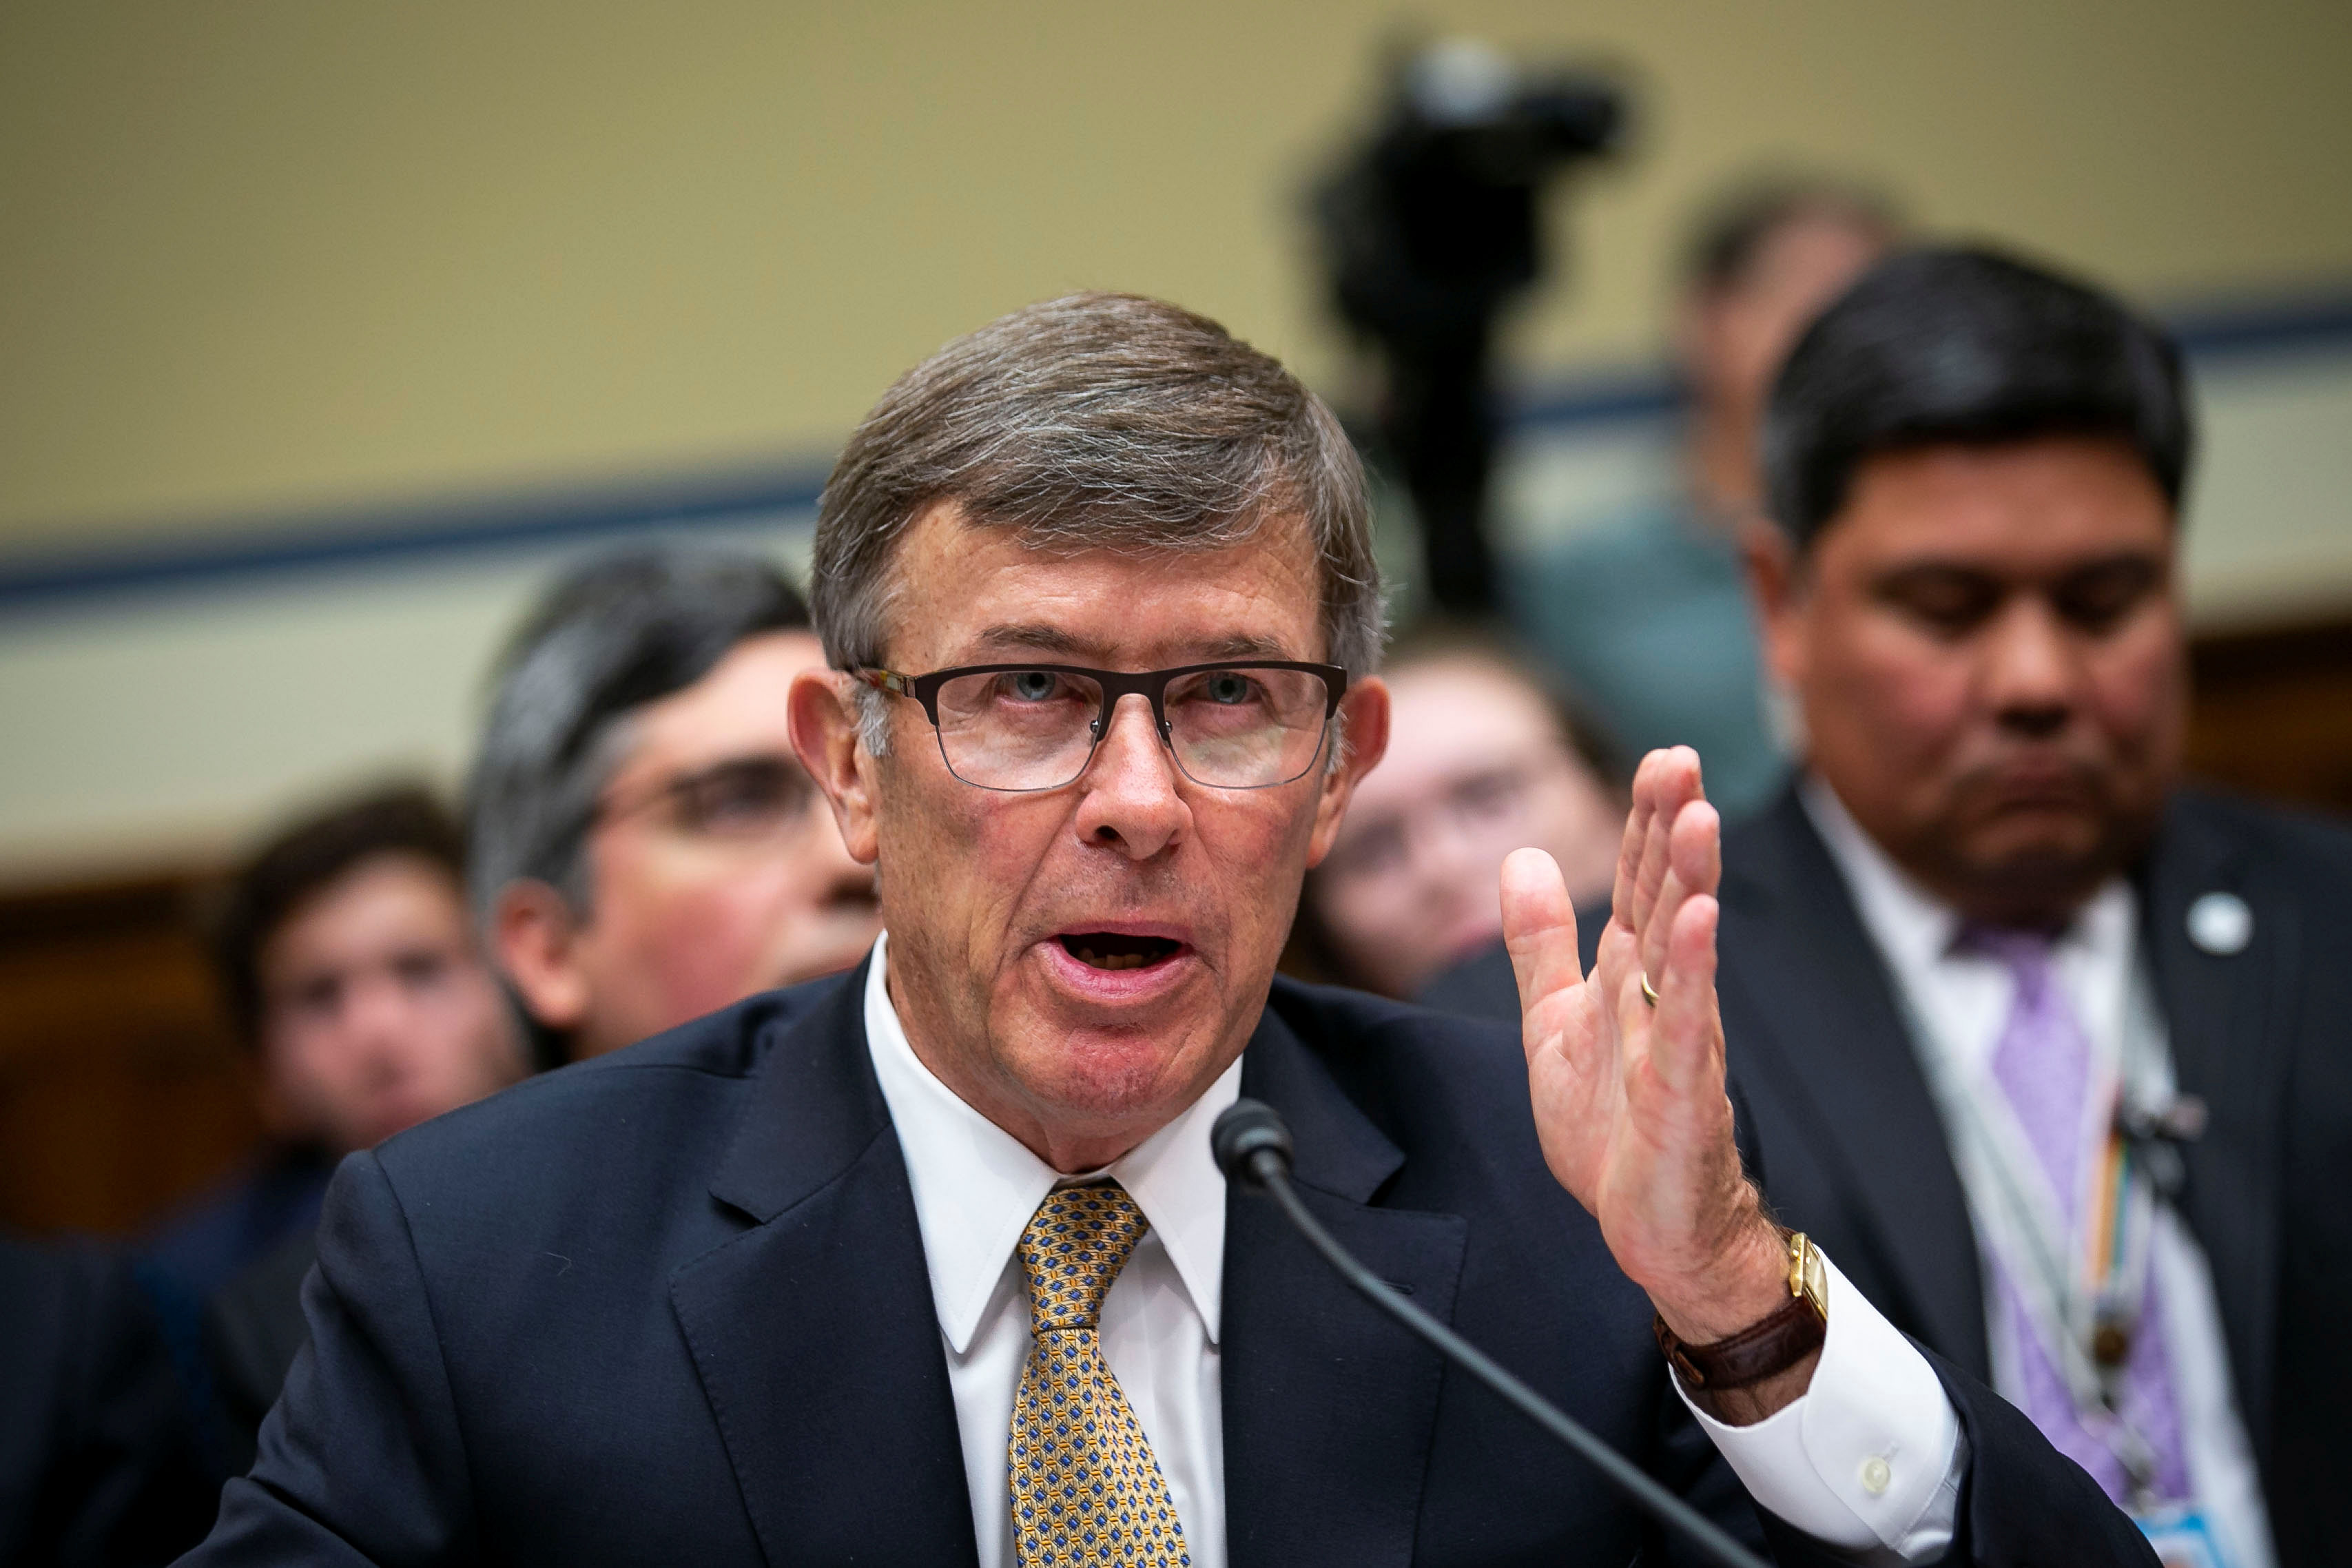 Joseph Maguire, acting director of national intelligence, testifies during a House Permanent Select Committee on Intelligence, on Capitol Hill in Washington, US (Credit: Reuters Photo)